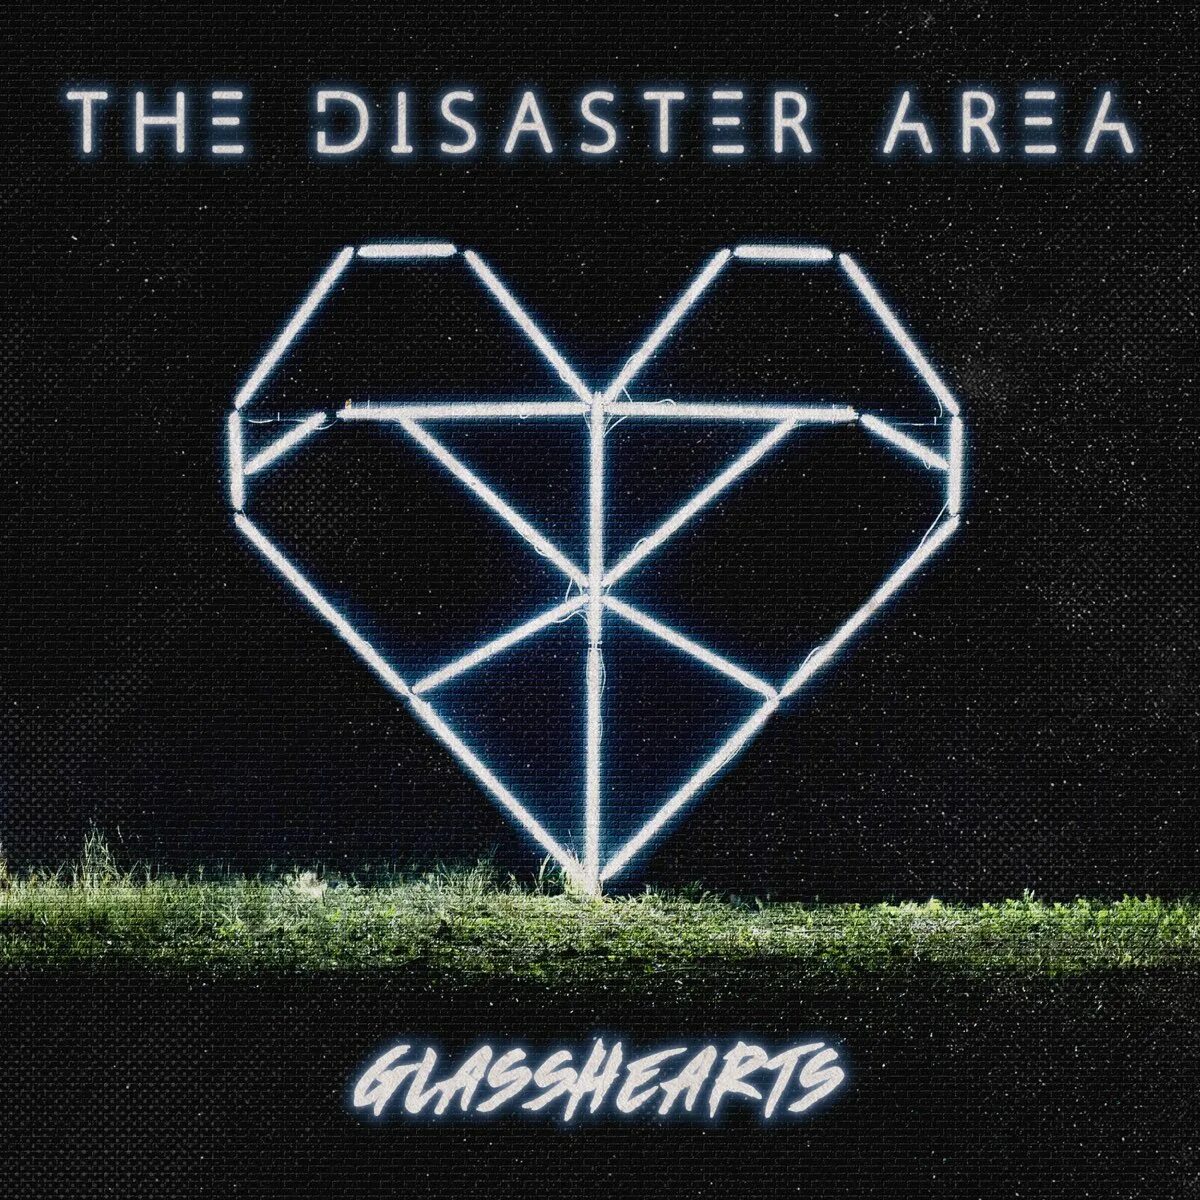 Disaster area. Glassheart the Disaster area. The Disaster area.